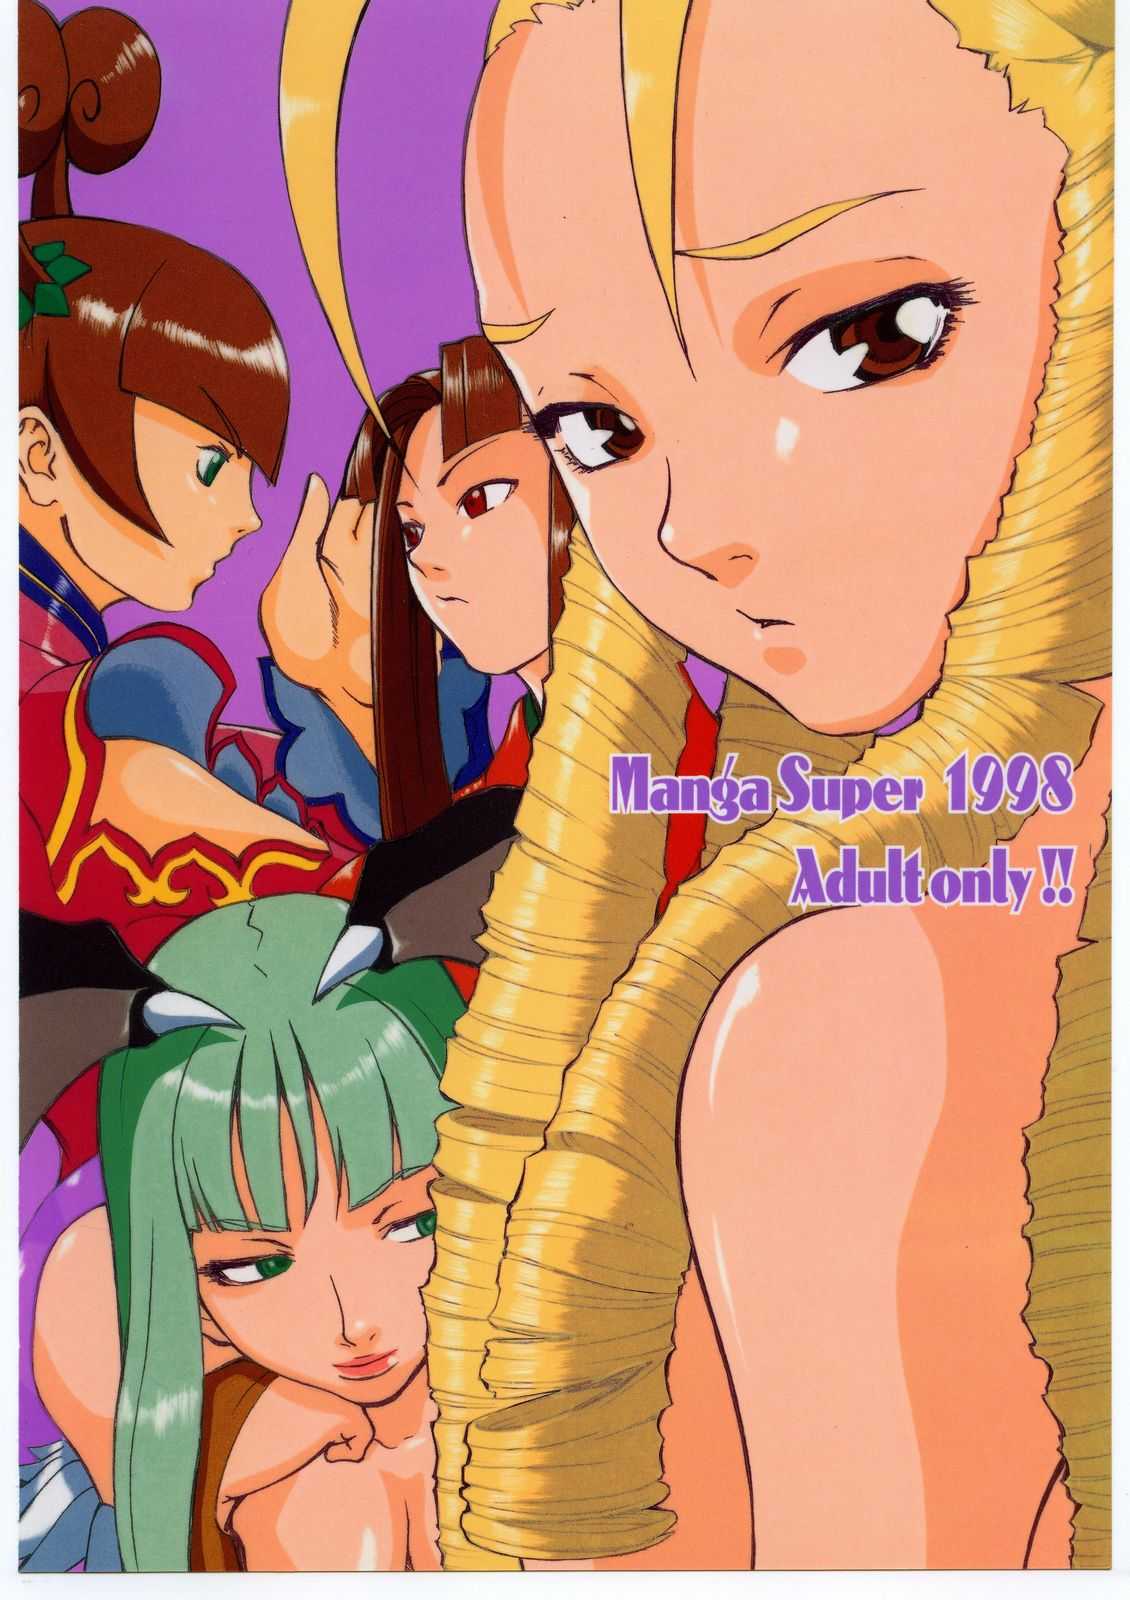 [Manga Super] NO HOLDS BARRED (Street Fighter) [マンガスーパー] NO HOLDS BARRED